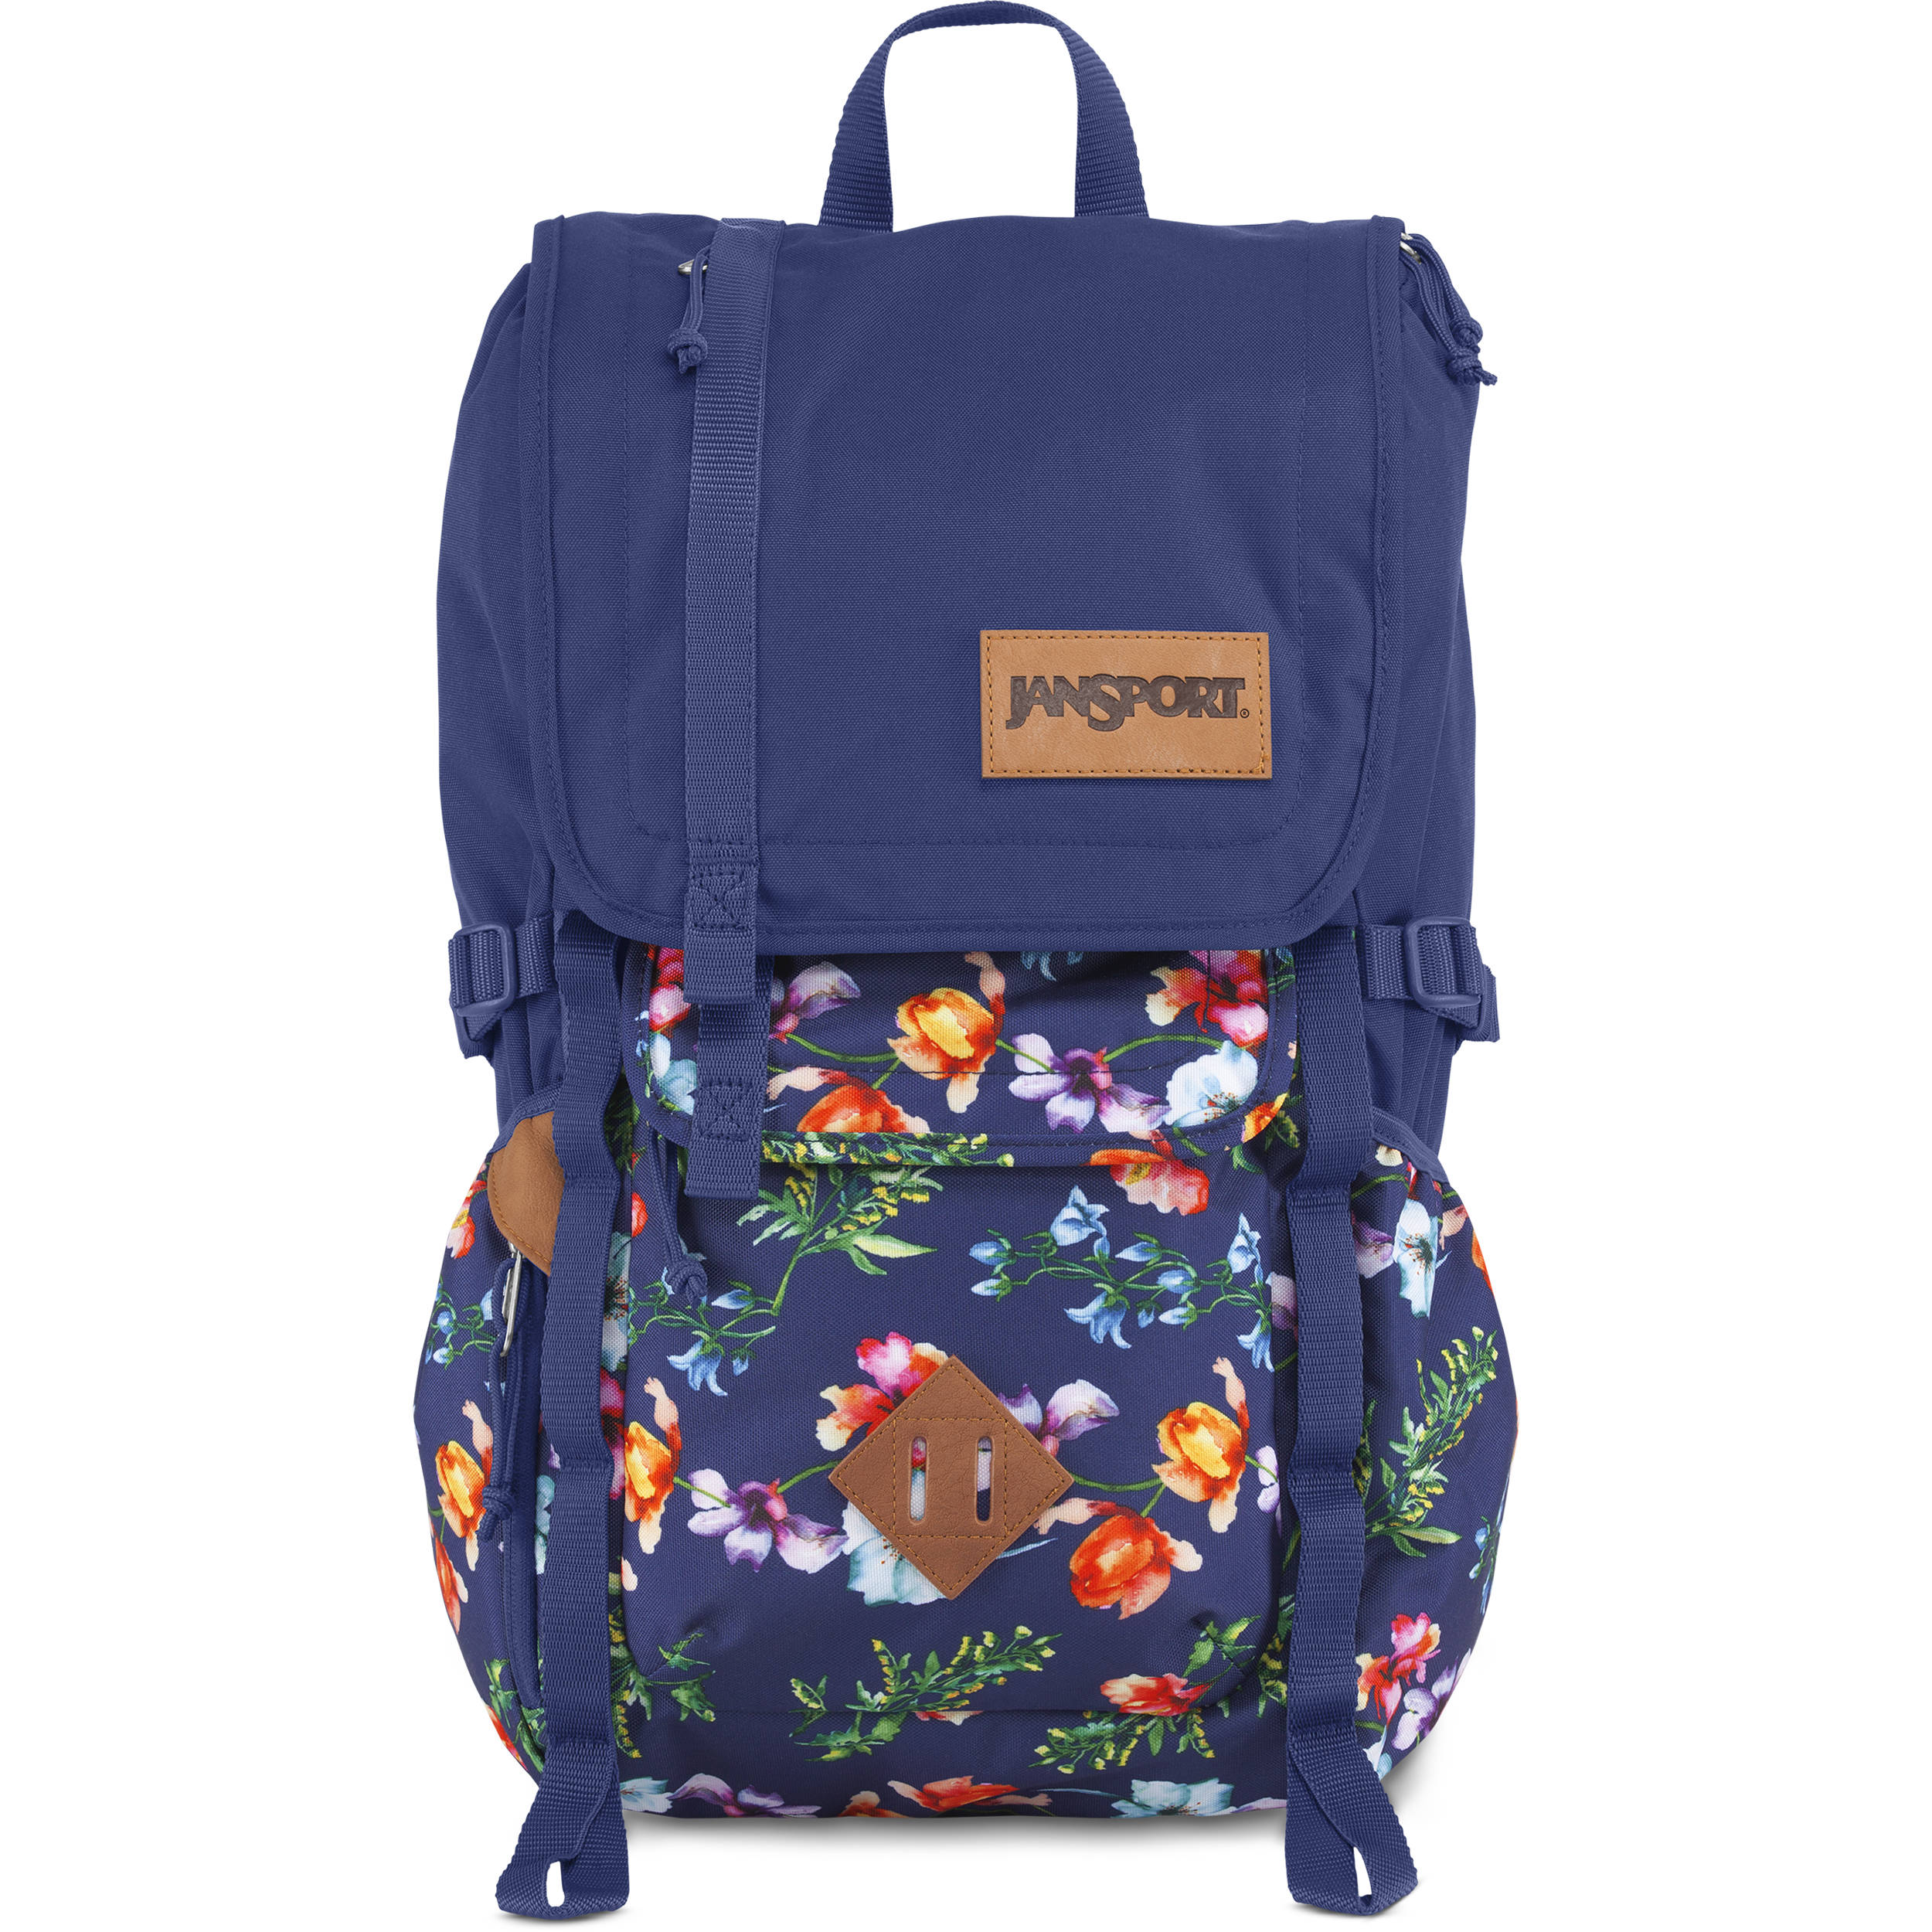 jansport backpack with sternum strap